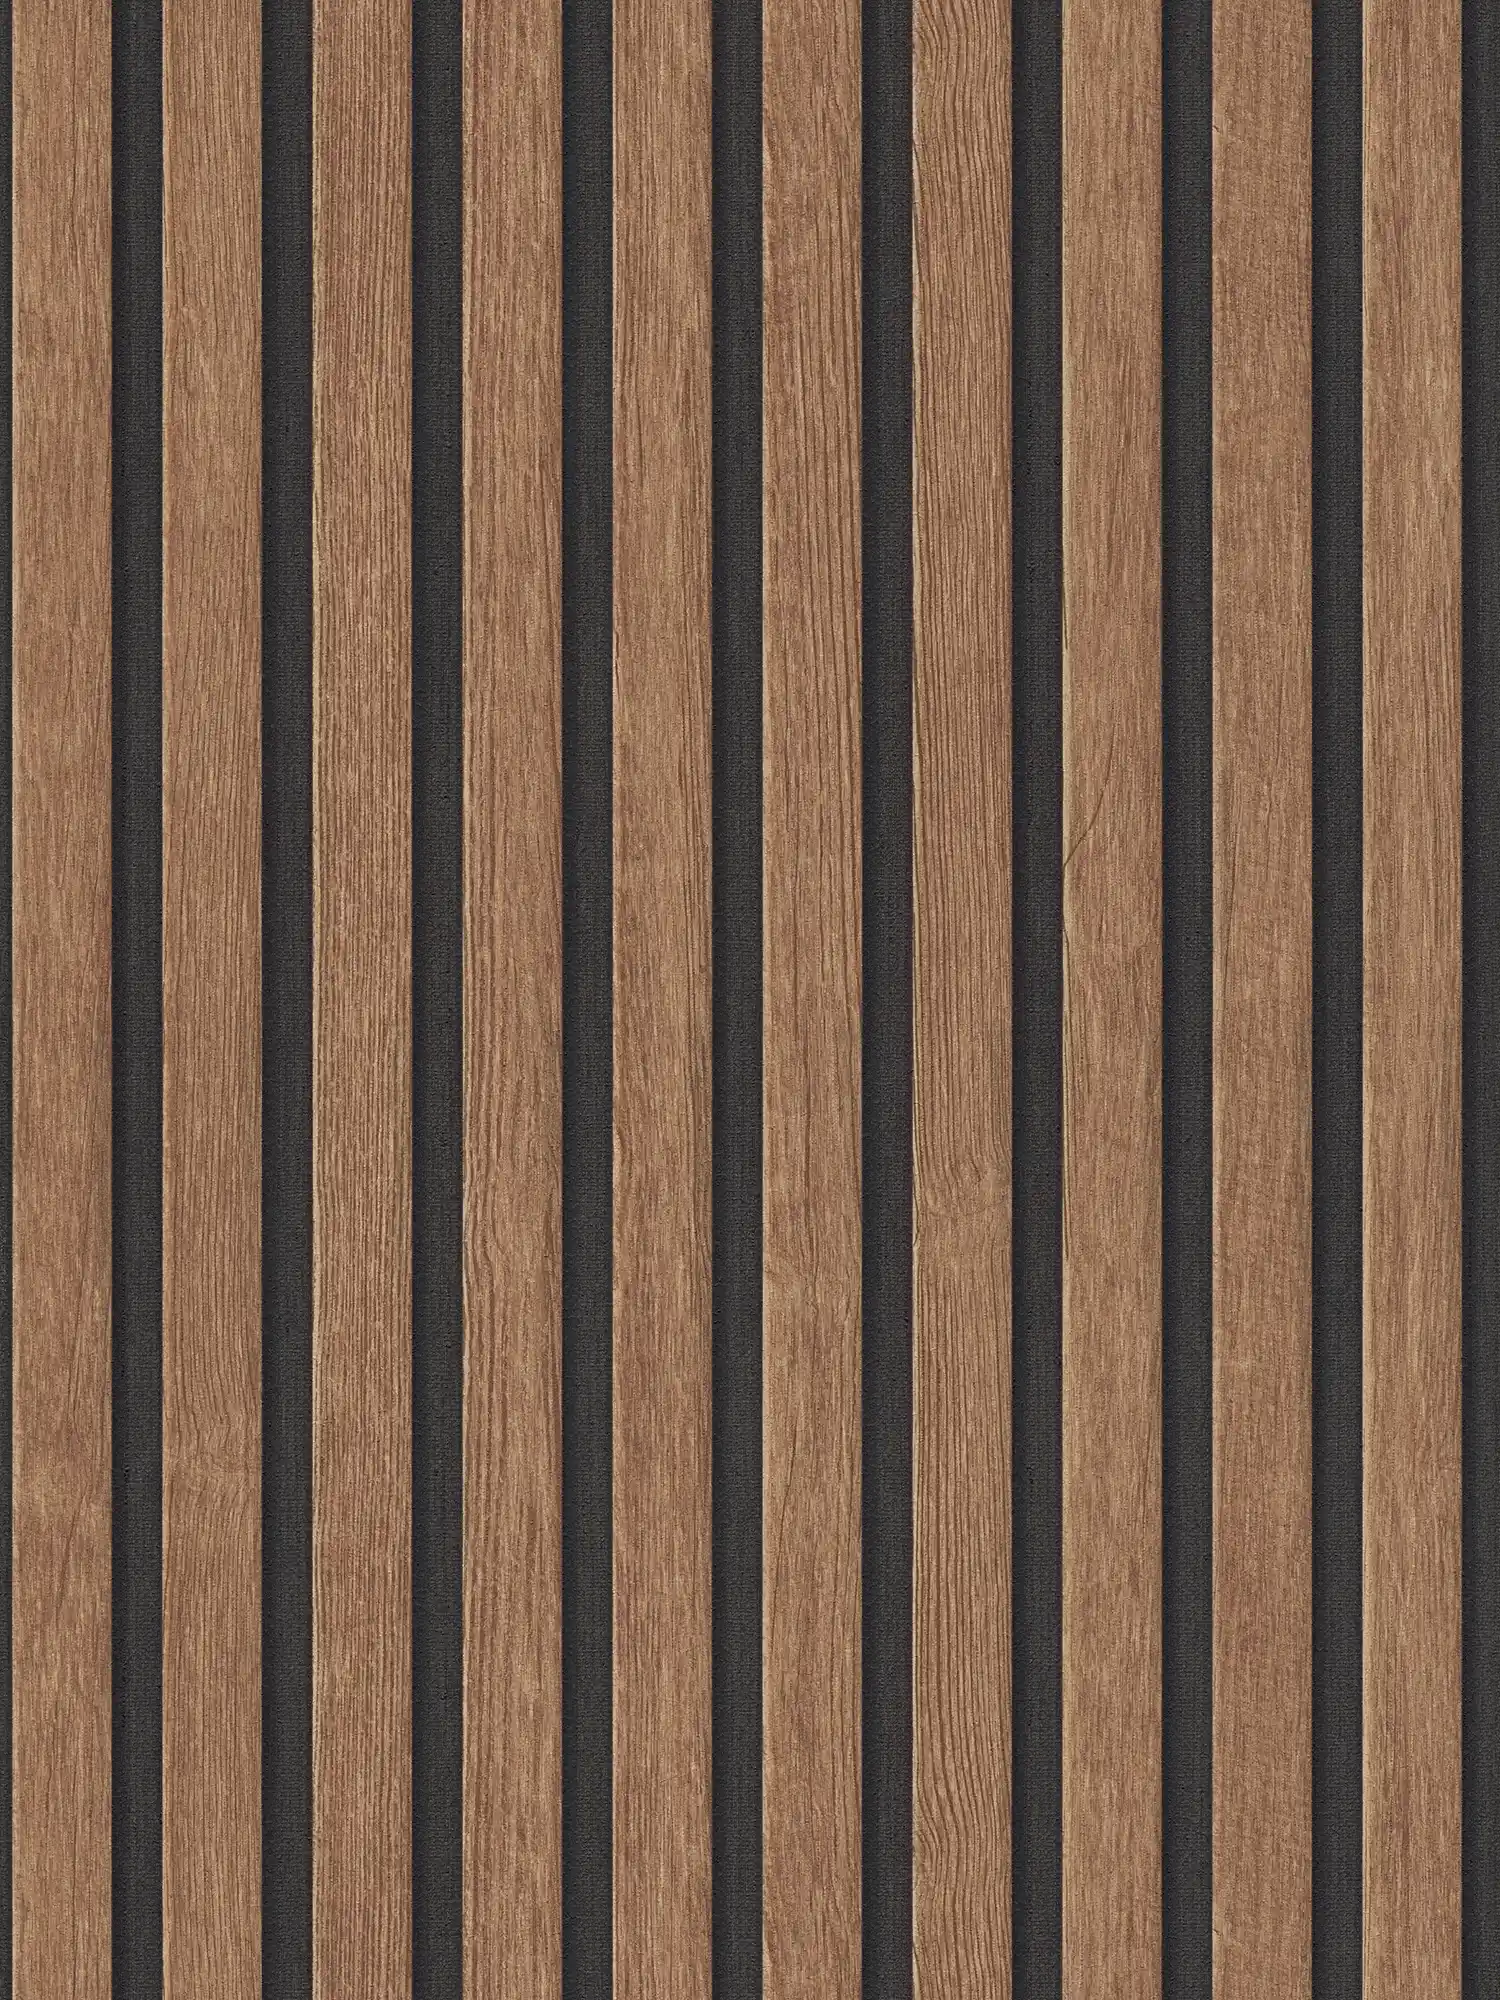         Acoustic panels non-woven wallpaper realistic wood look - Brown, Black
    